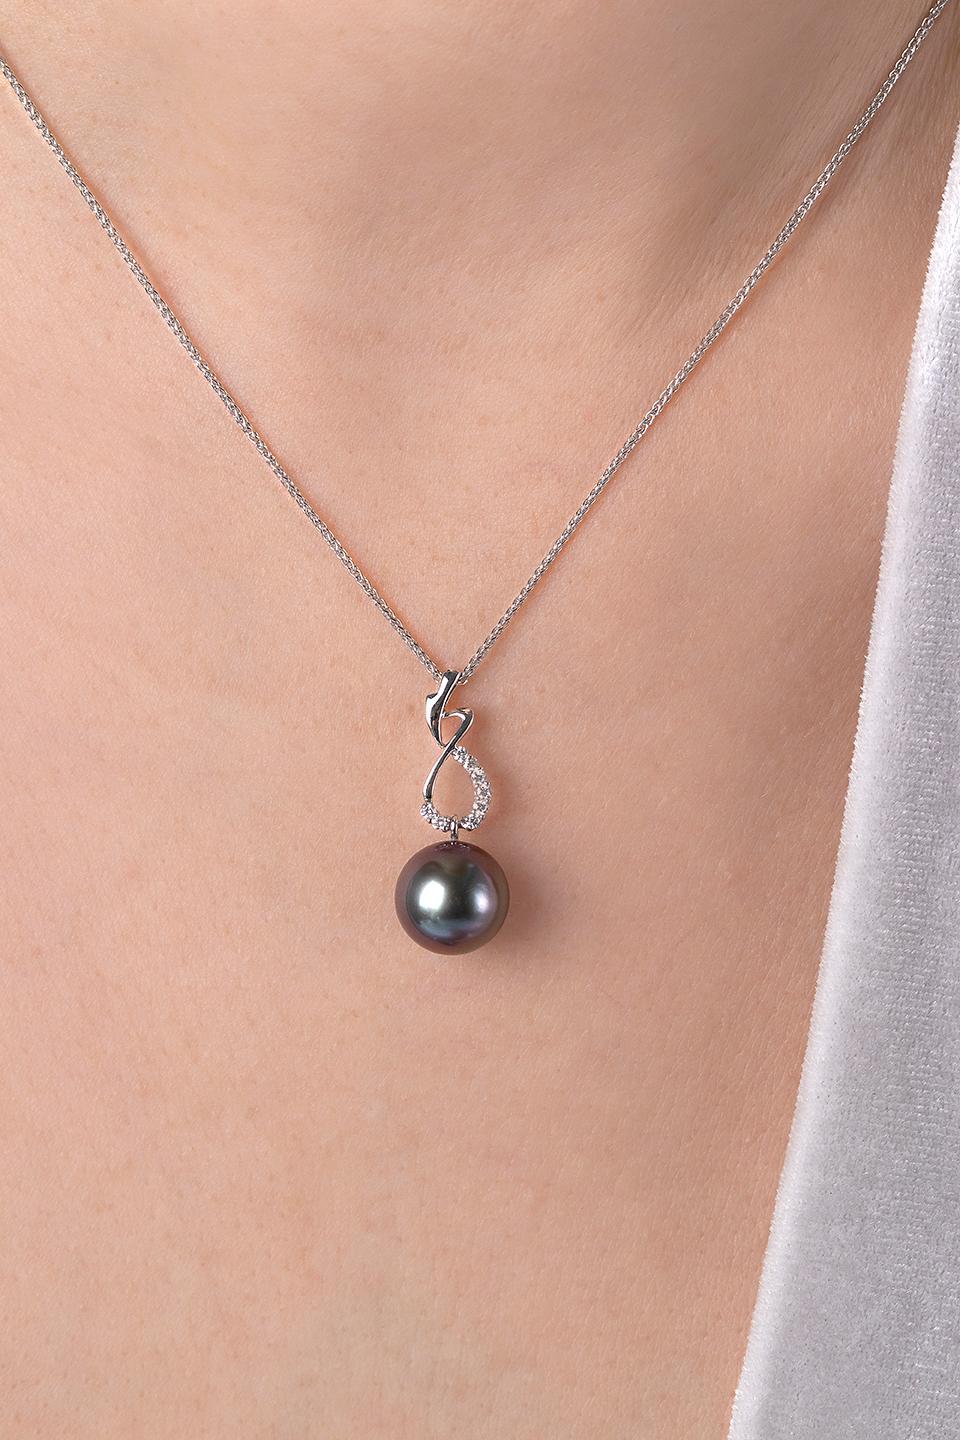 This unique pendant by Yoko London features a striking, natural colour 11-12mm Tahitian pearl beneath a contemporary, diamond-traced twist. The perfect piece to take you from day to night, this pendant will elevate any outfit - especially when